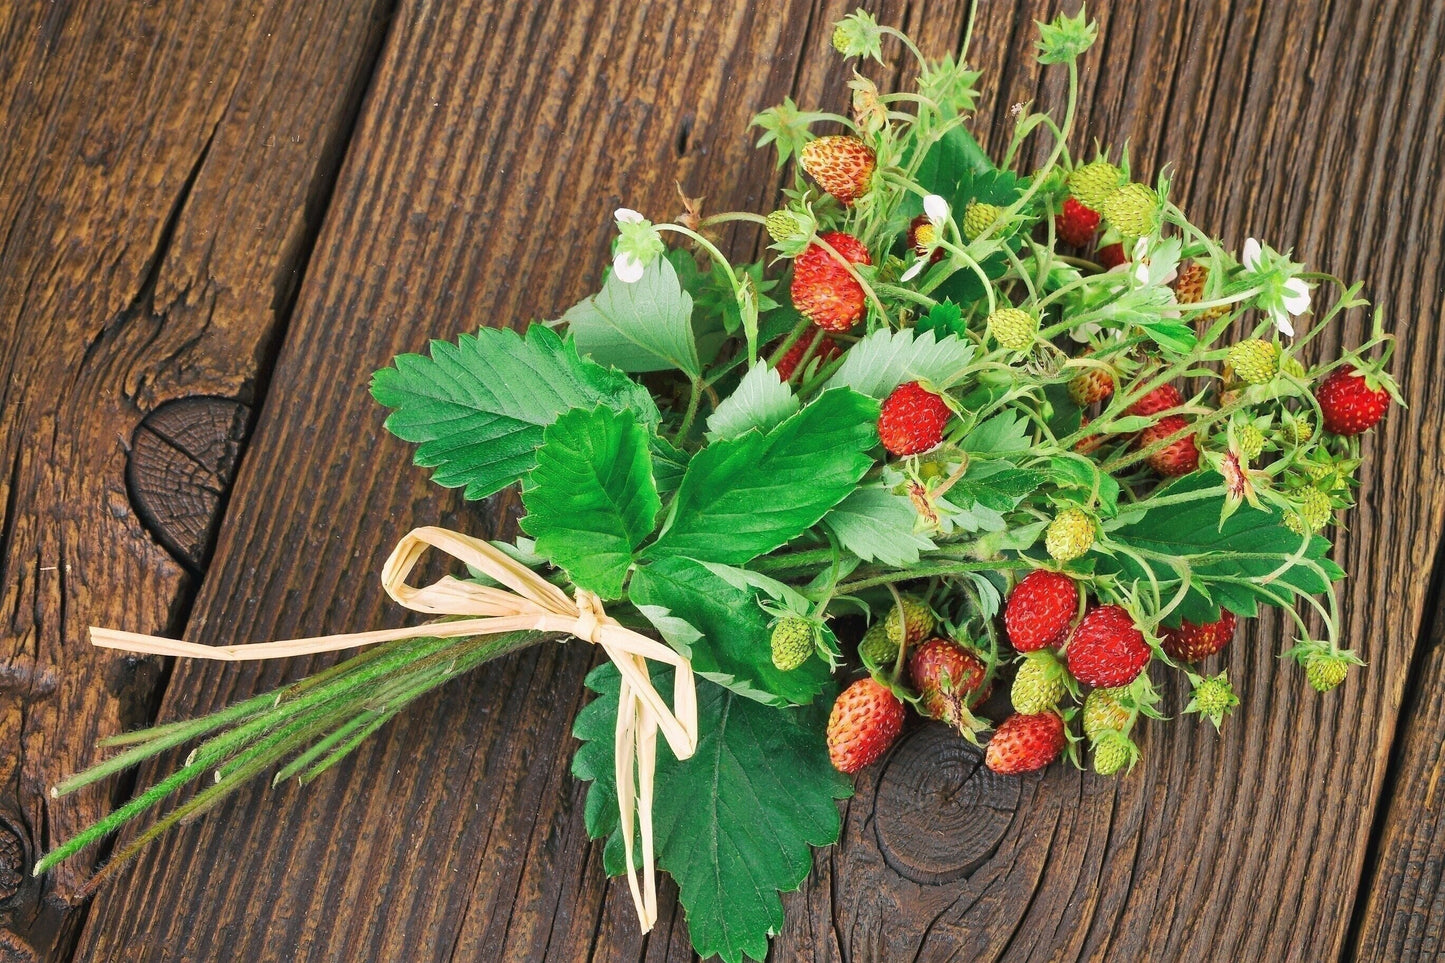 80 California WOODLAND STRAWBERRY Fragaria Vesca Bracteata Pacific Native Strawberry Red Berry Fruit White Flower Seeds